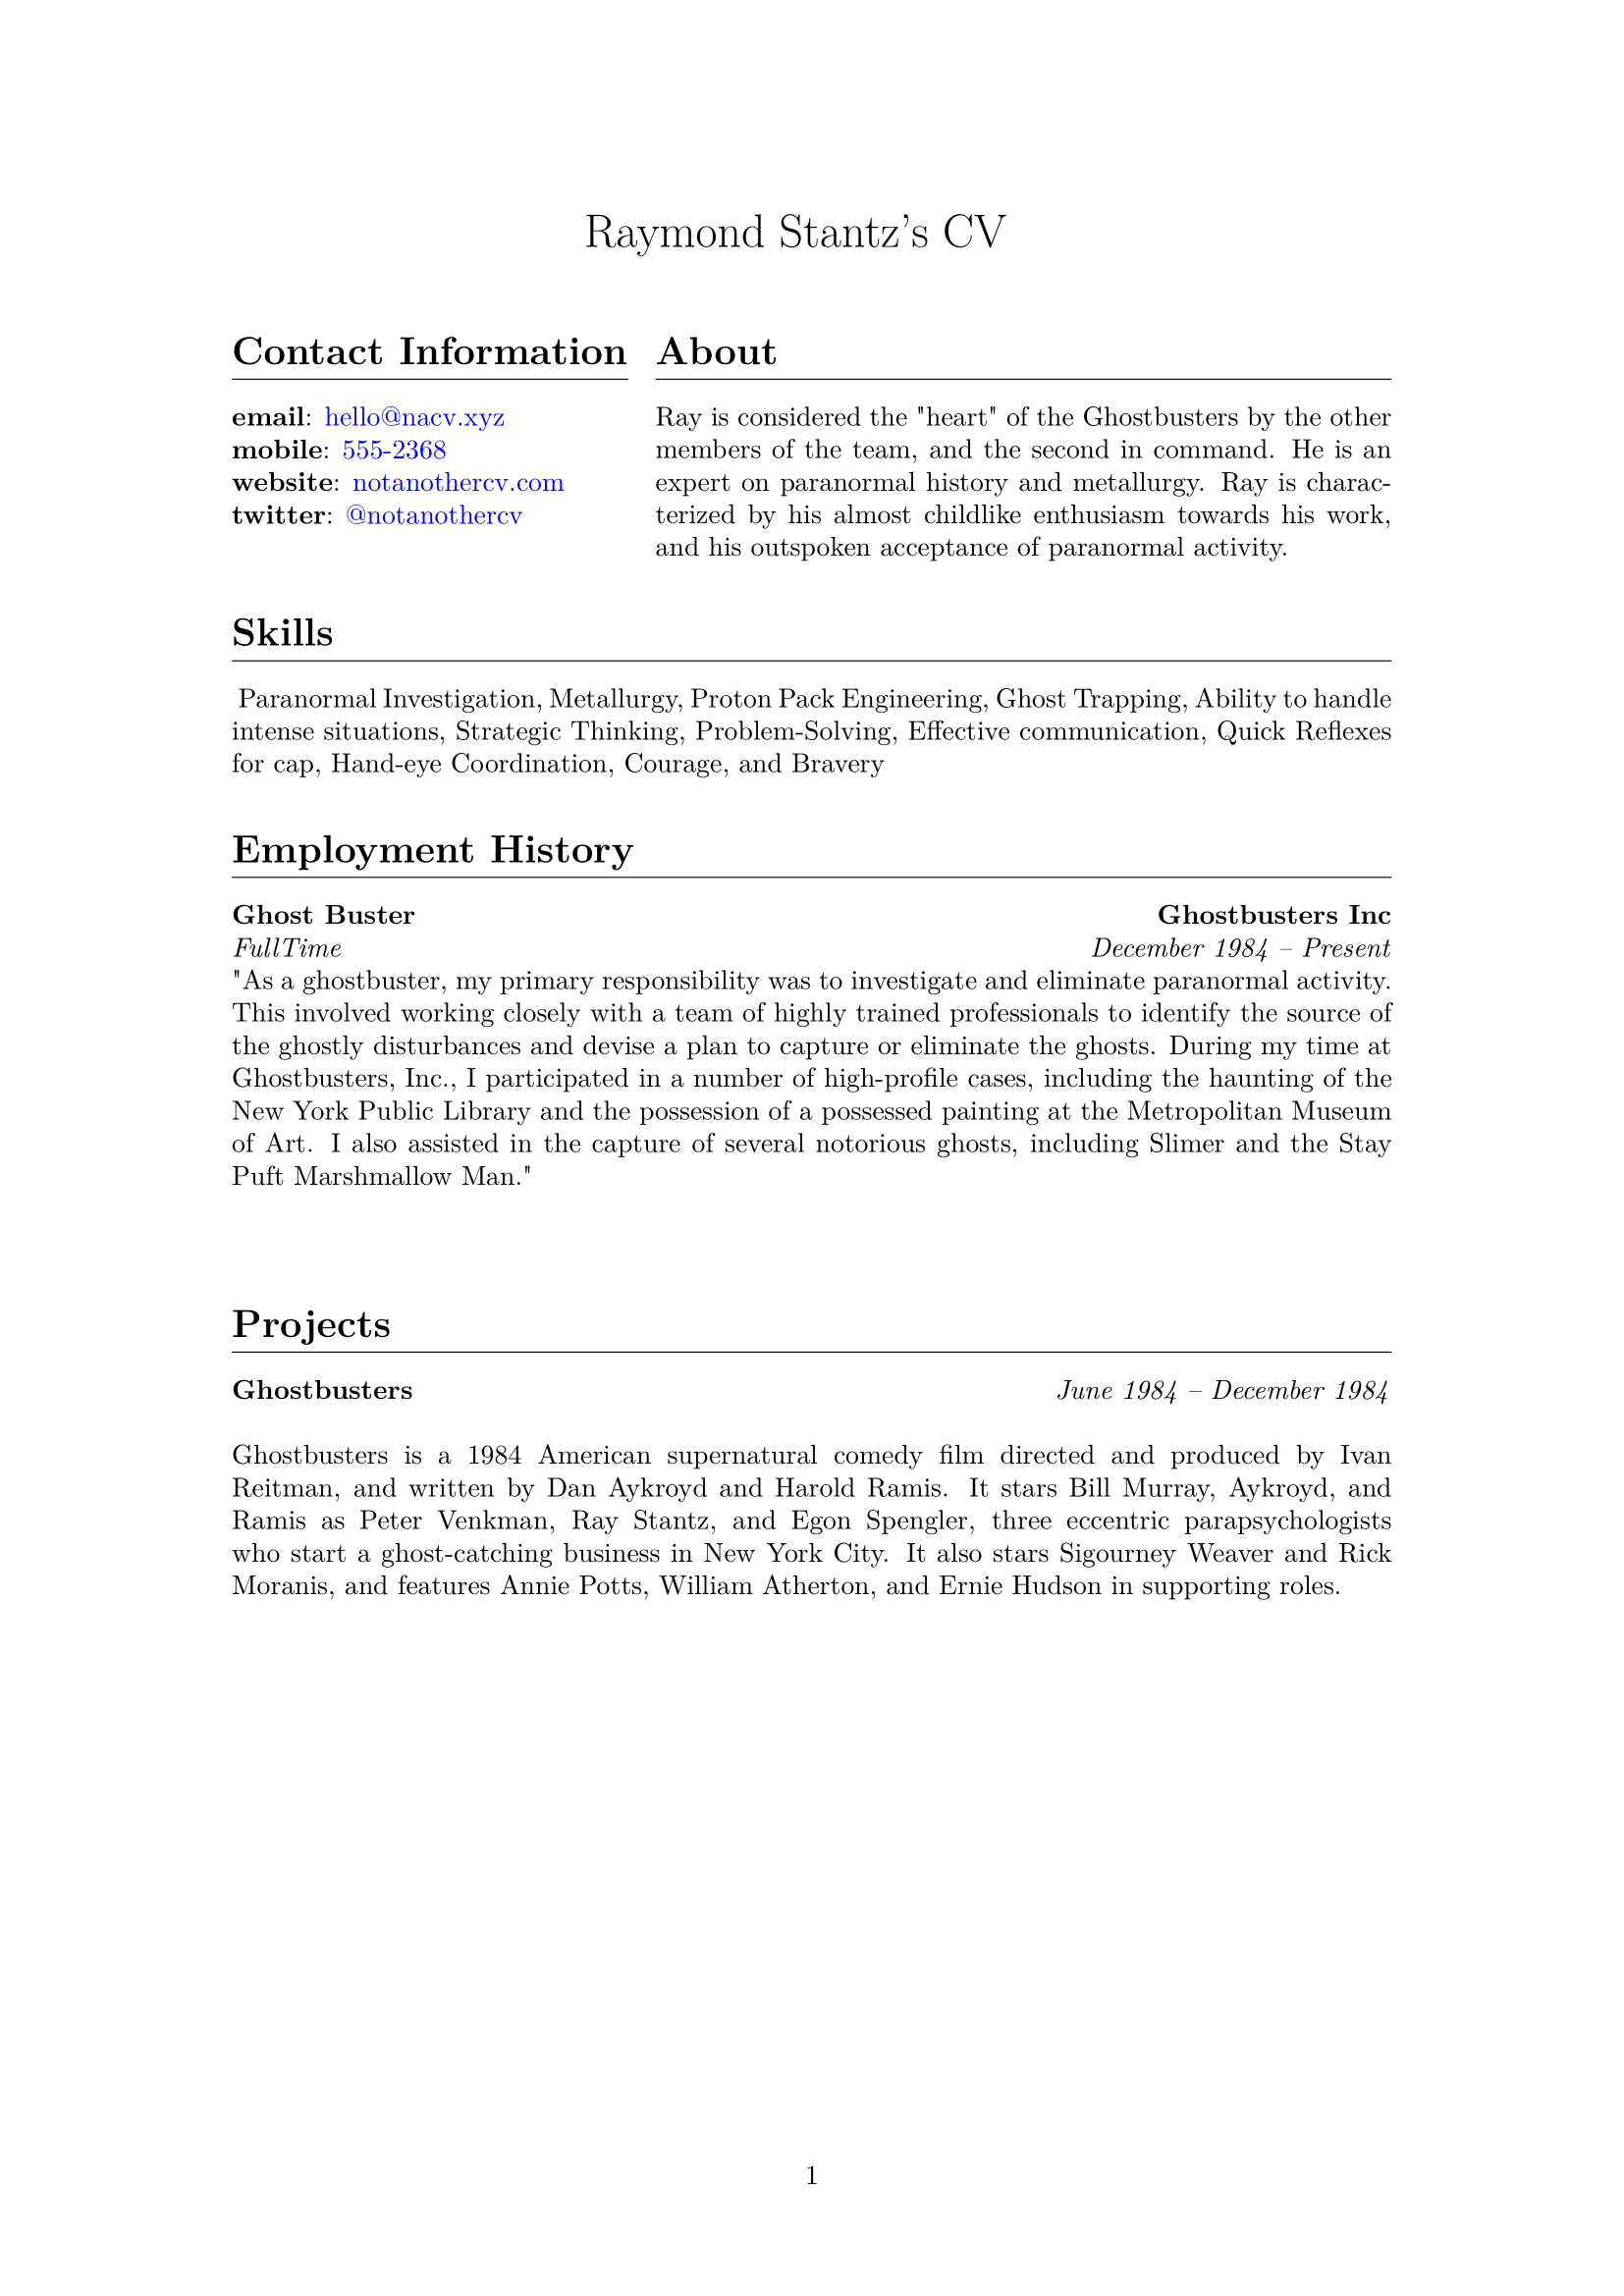 An example cv for a ghostbuster